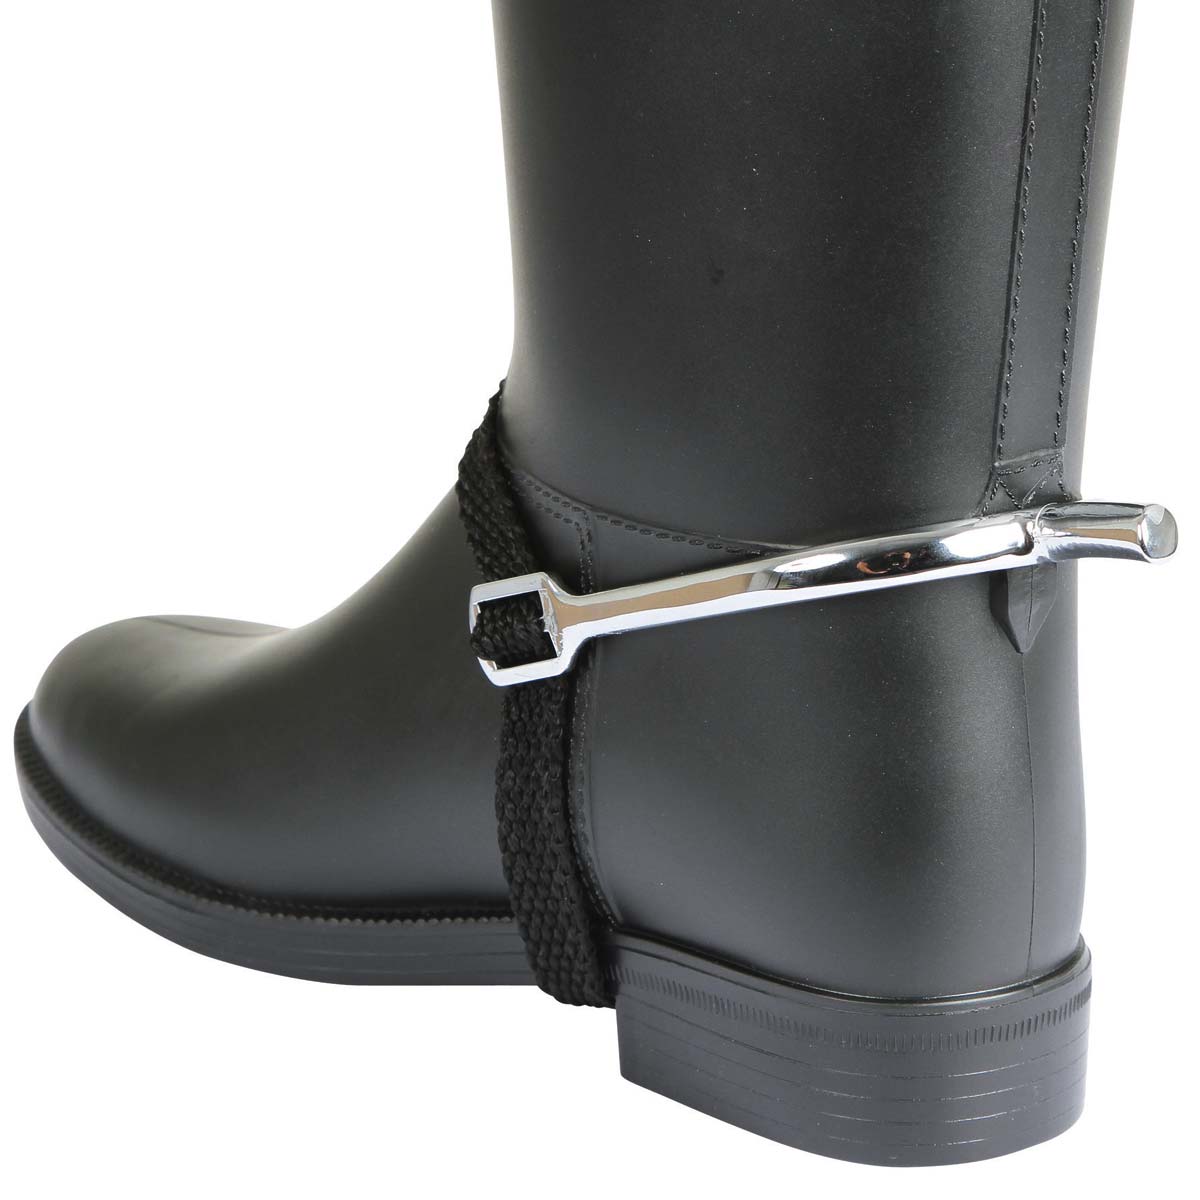 Covalliero spurs ball with straps 15 mm